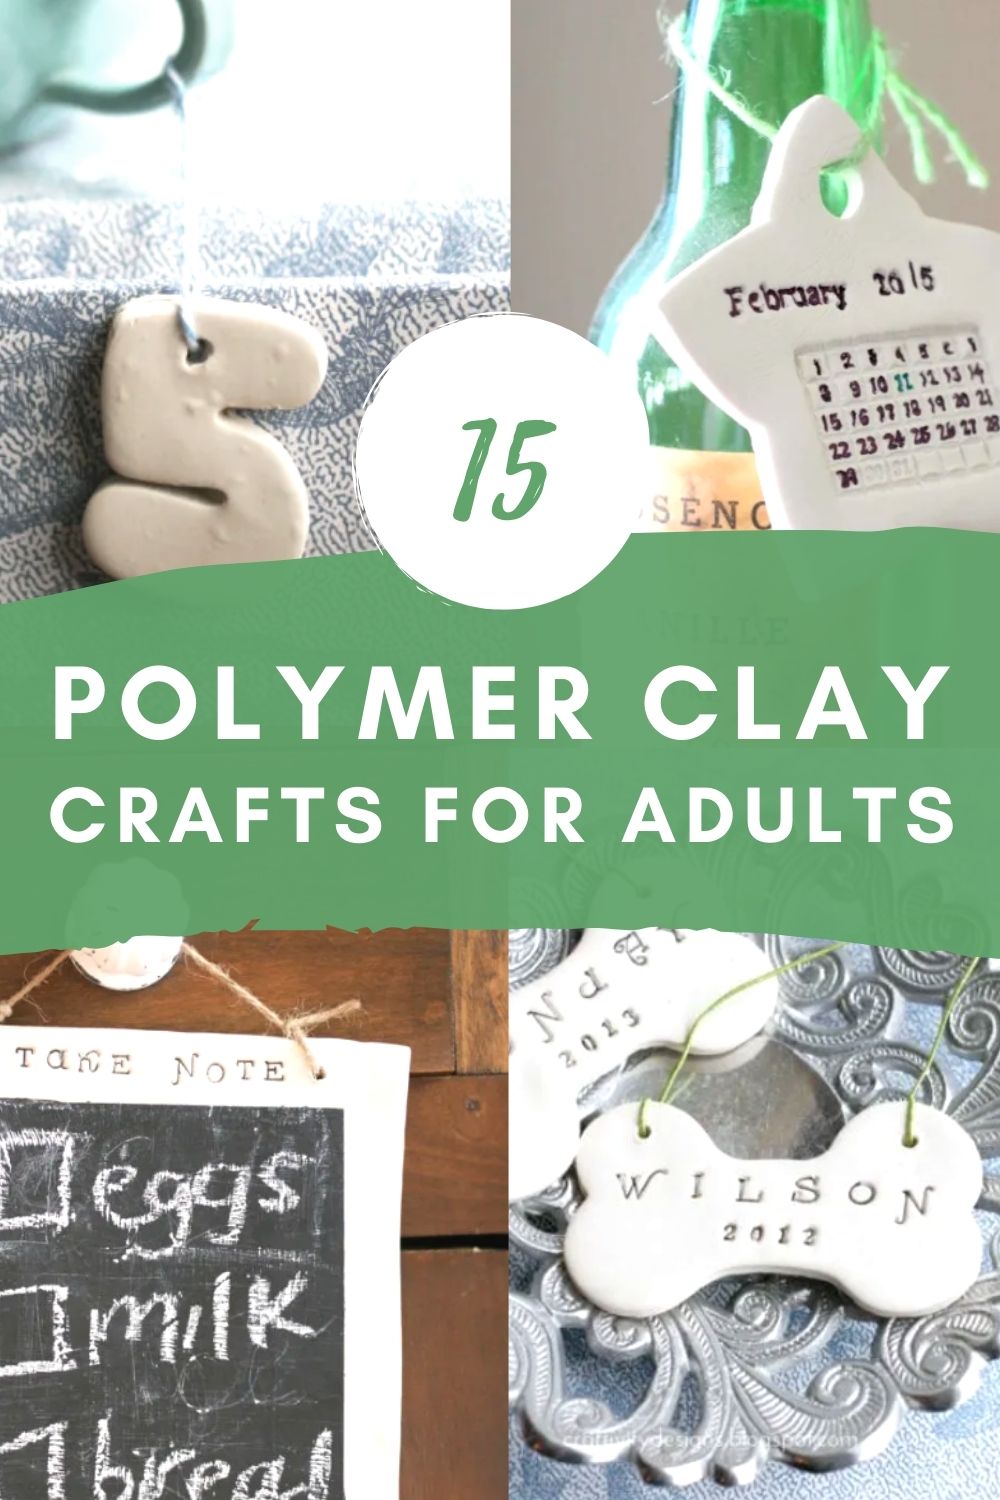 10 Things to Make with Air Dry Clay: Fun and Beautiful Projects - Fun  Loving Families